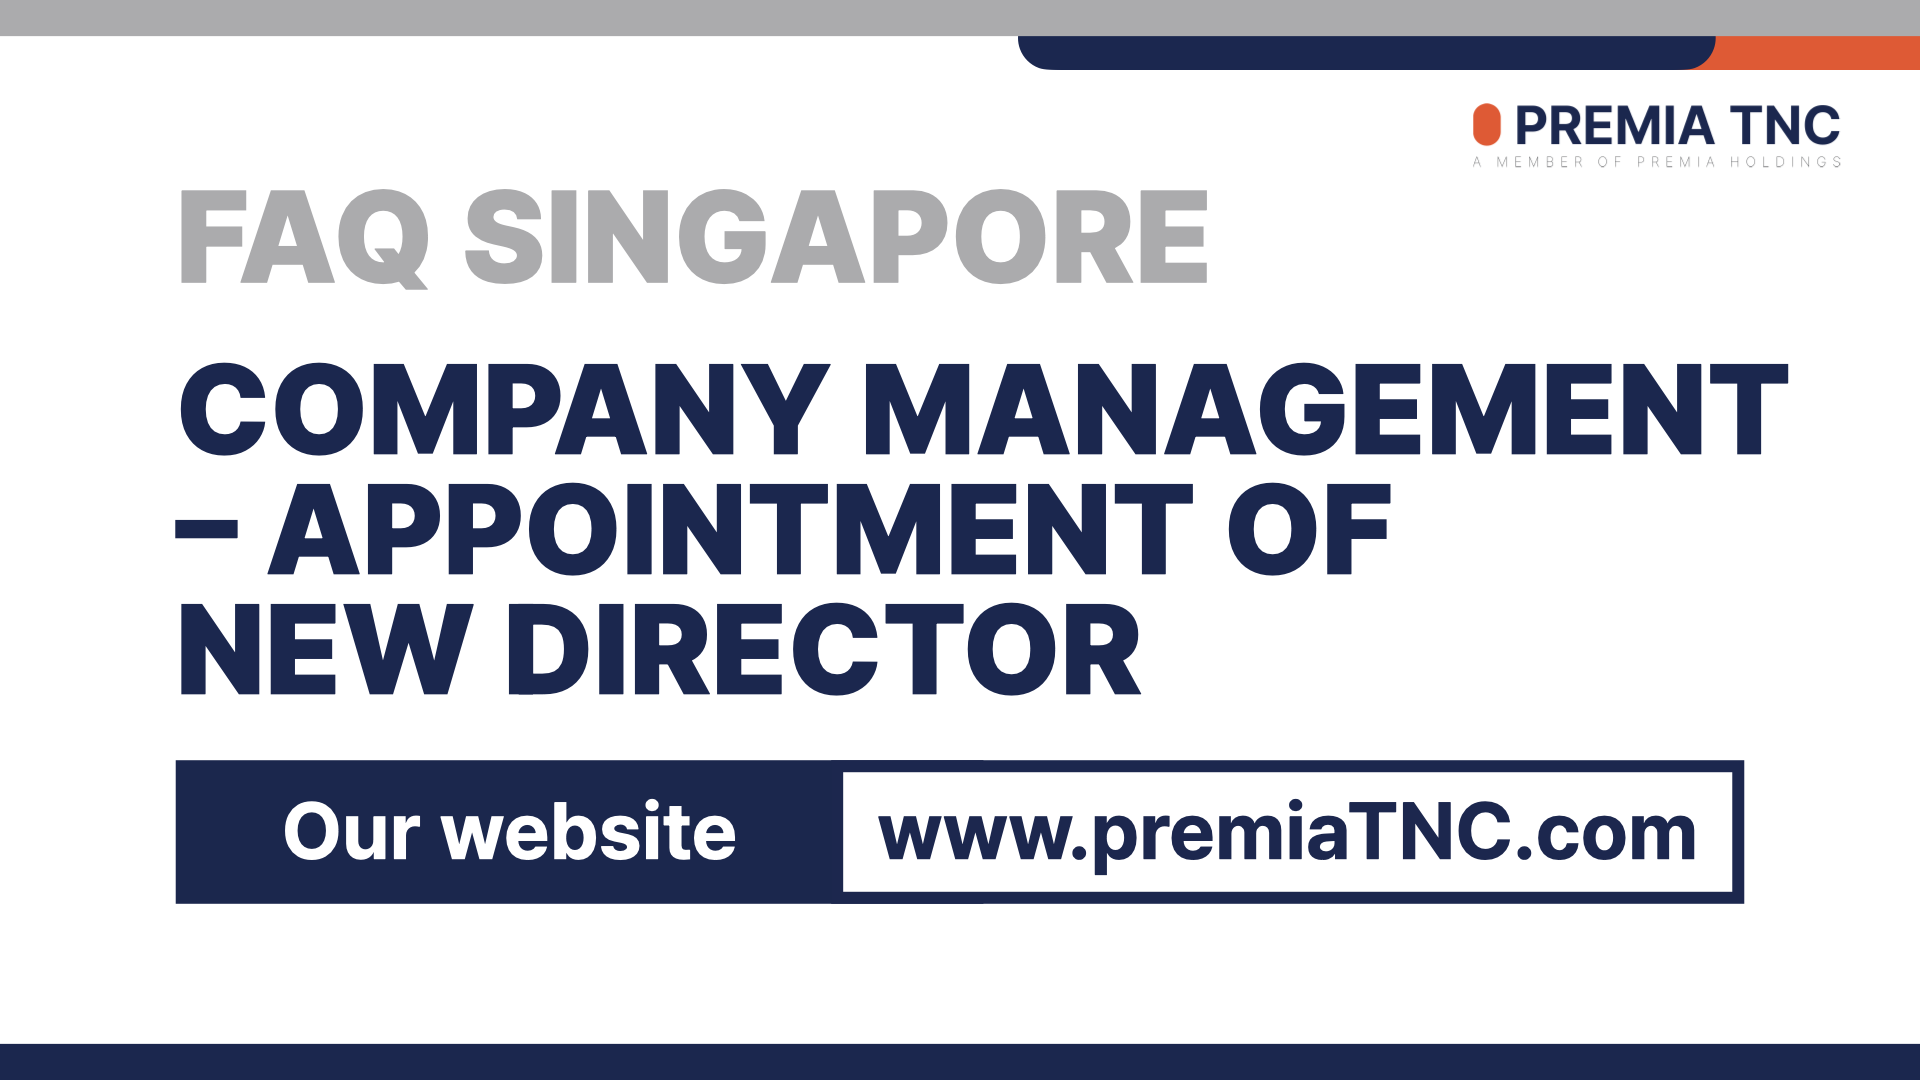 Company management - Appointment of new director